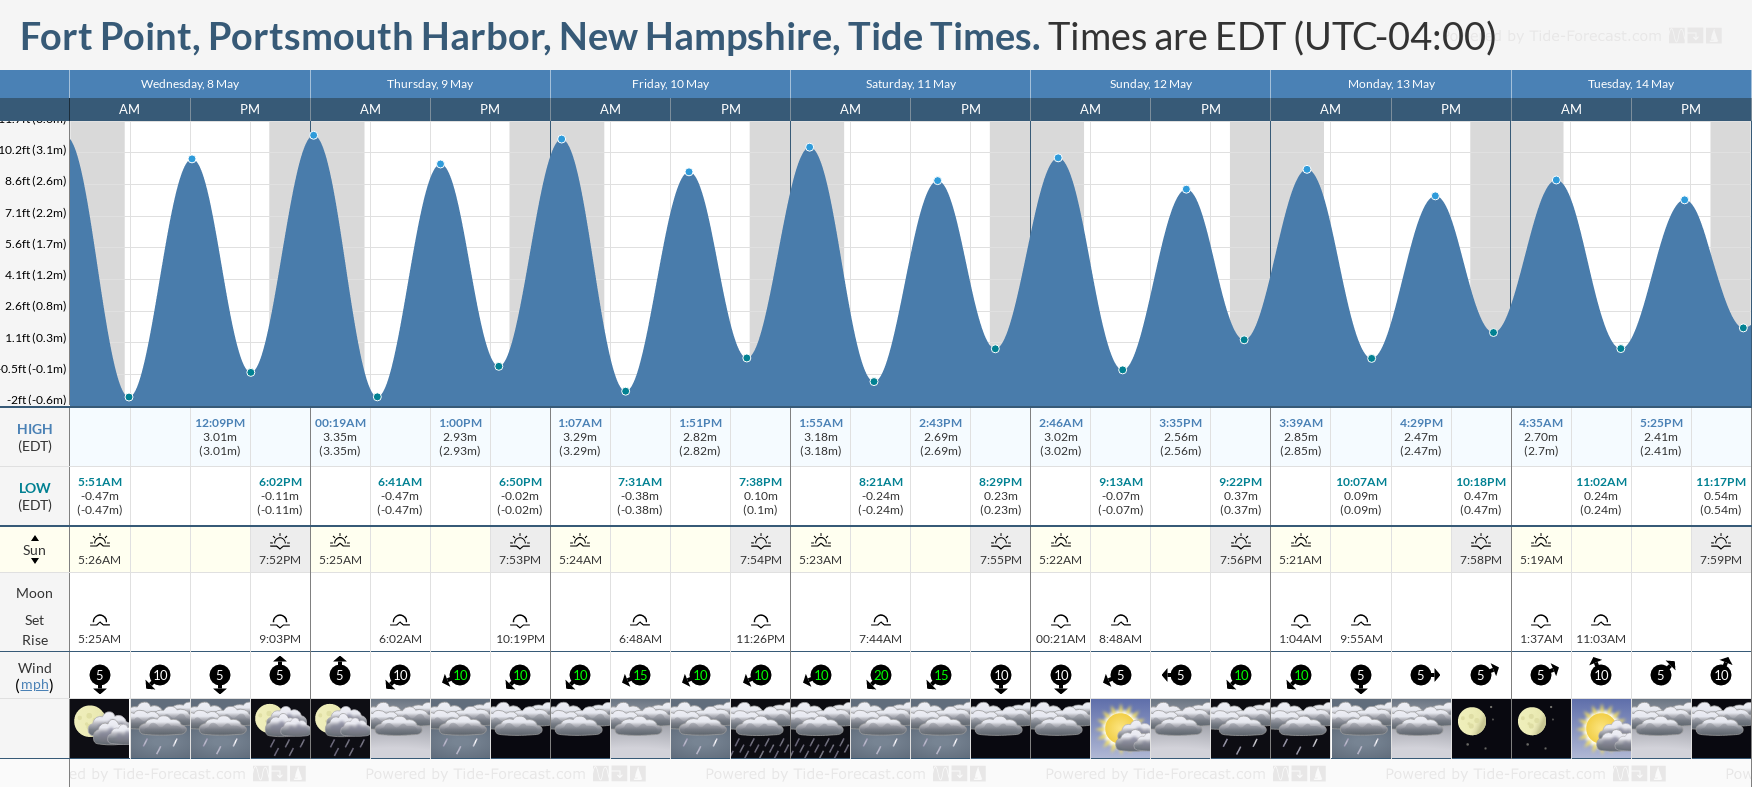 Fort Point, Portsmouth Harbor, New Hampshire Tide Chart including high and low tide tide times for the next 7 days